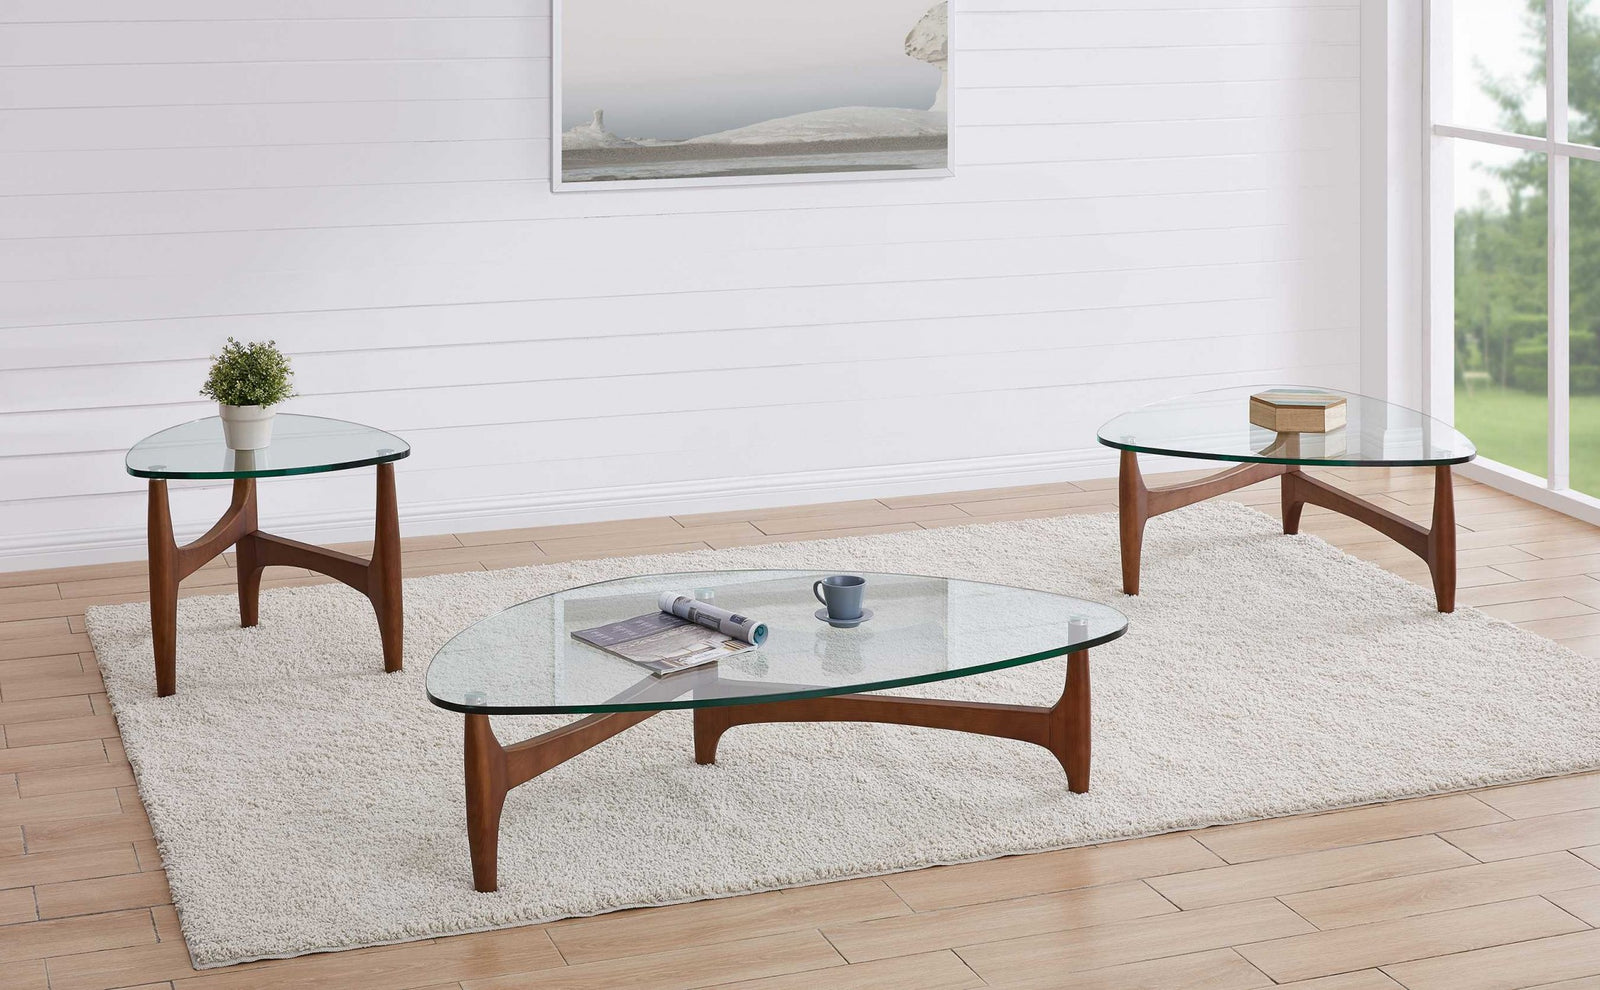 23.63" X 23.63" X 19.69" Clear Tempered Glass Side Table With Walnut Base